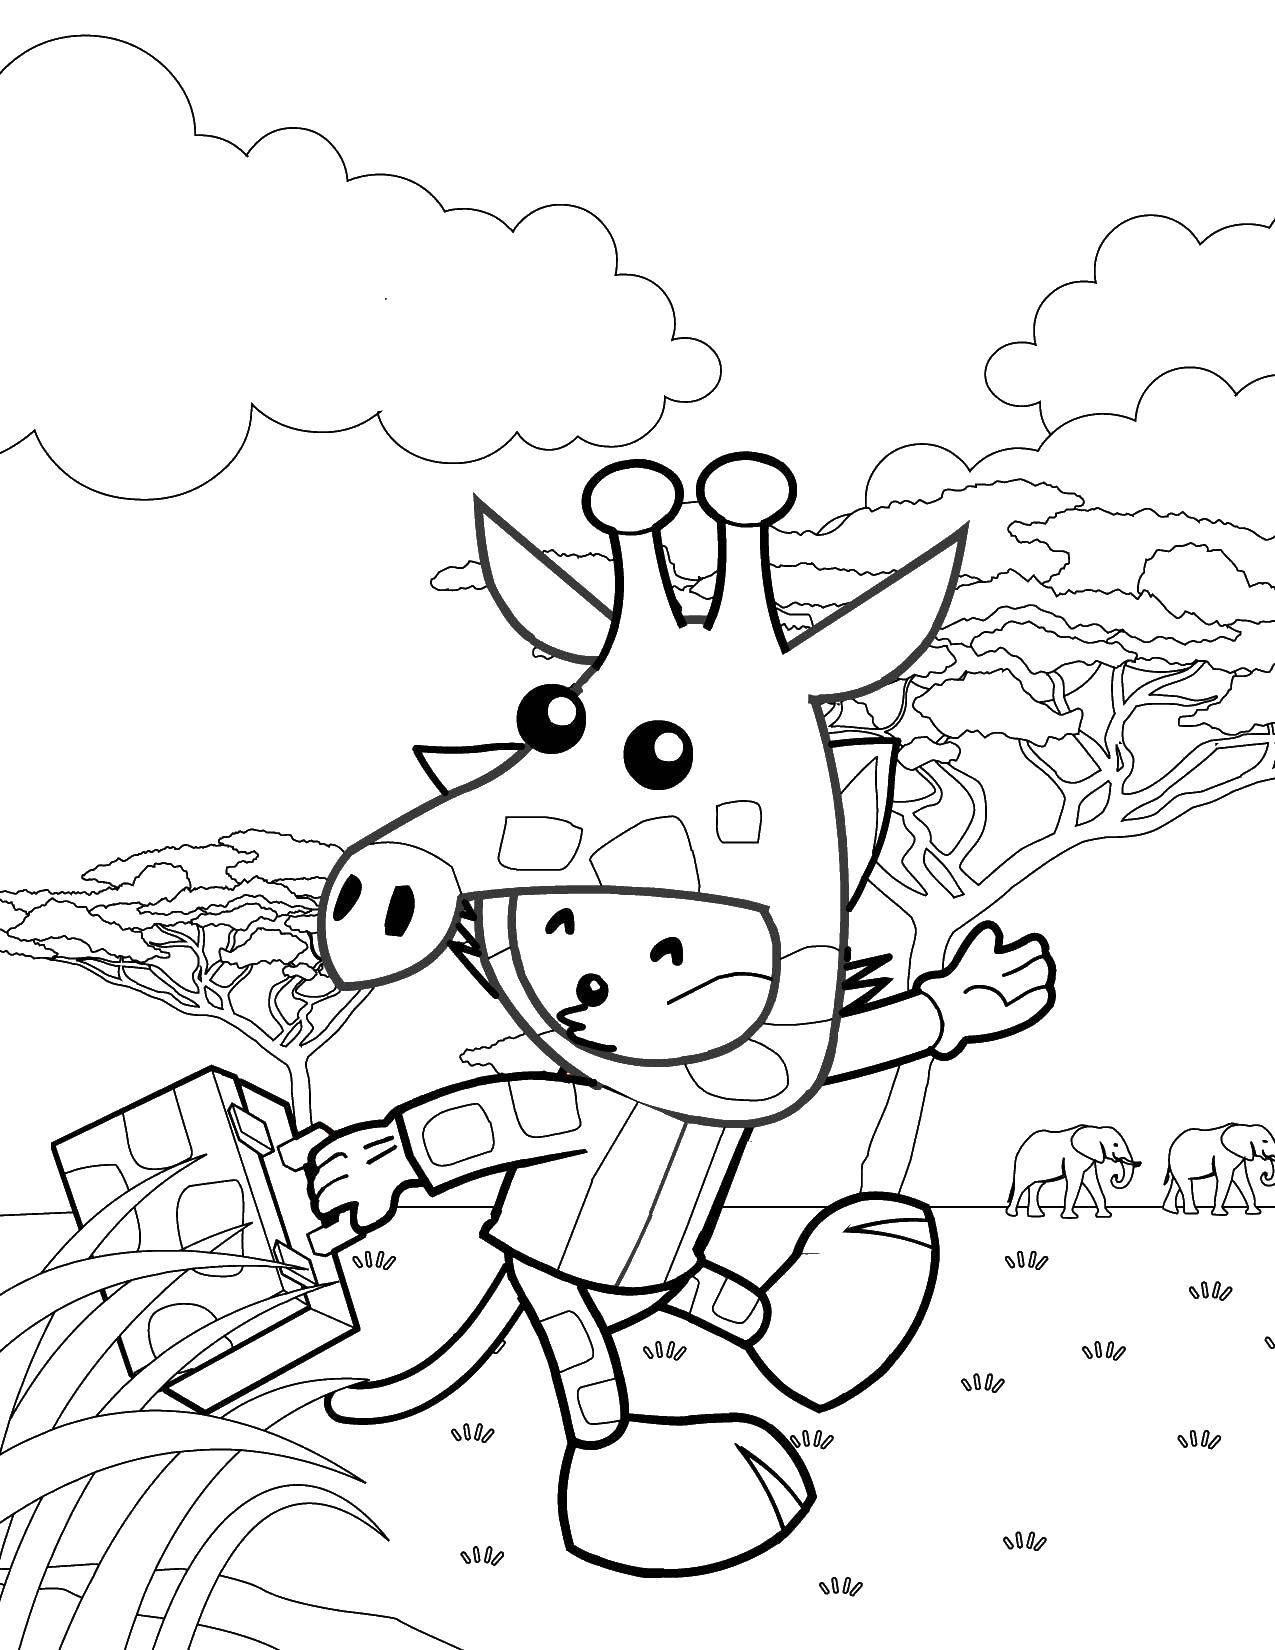 Coloring Kitty walks in Africa in a giraffe. Category Bathroom with shower. Tags:  giraffe, elephant, clouds.